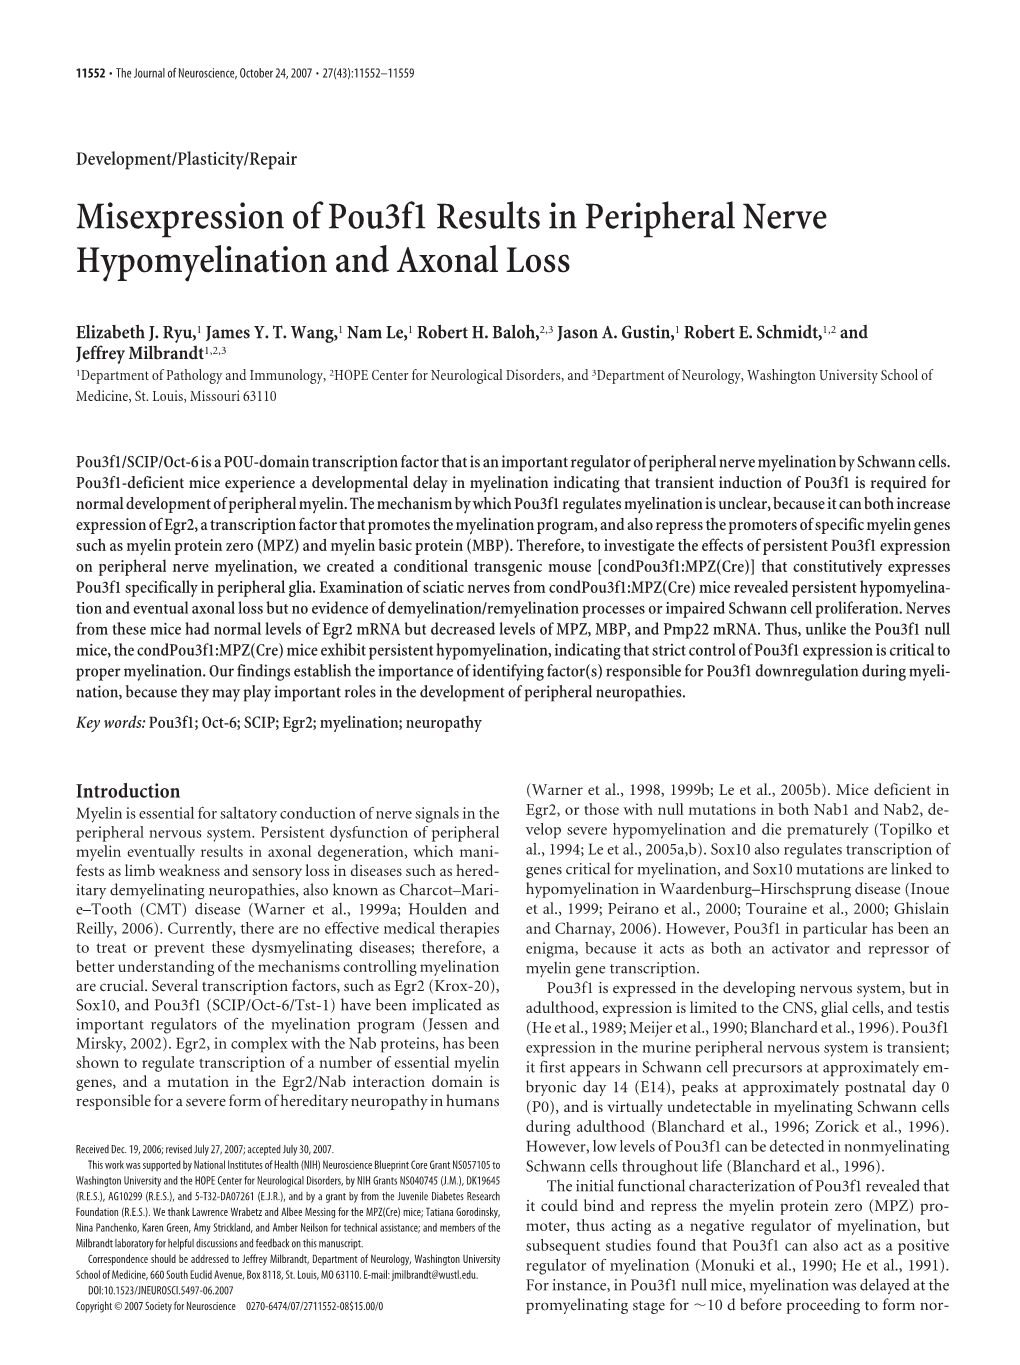 Misexpression of Pou3f1 Results in Peripheral Nerve Hypomyelination and Axonal Loss